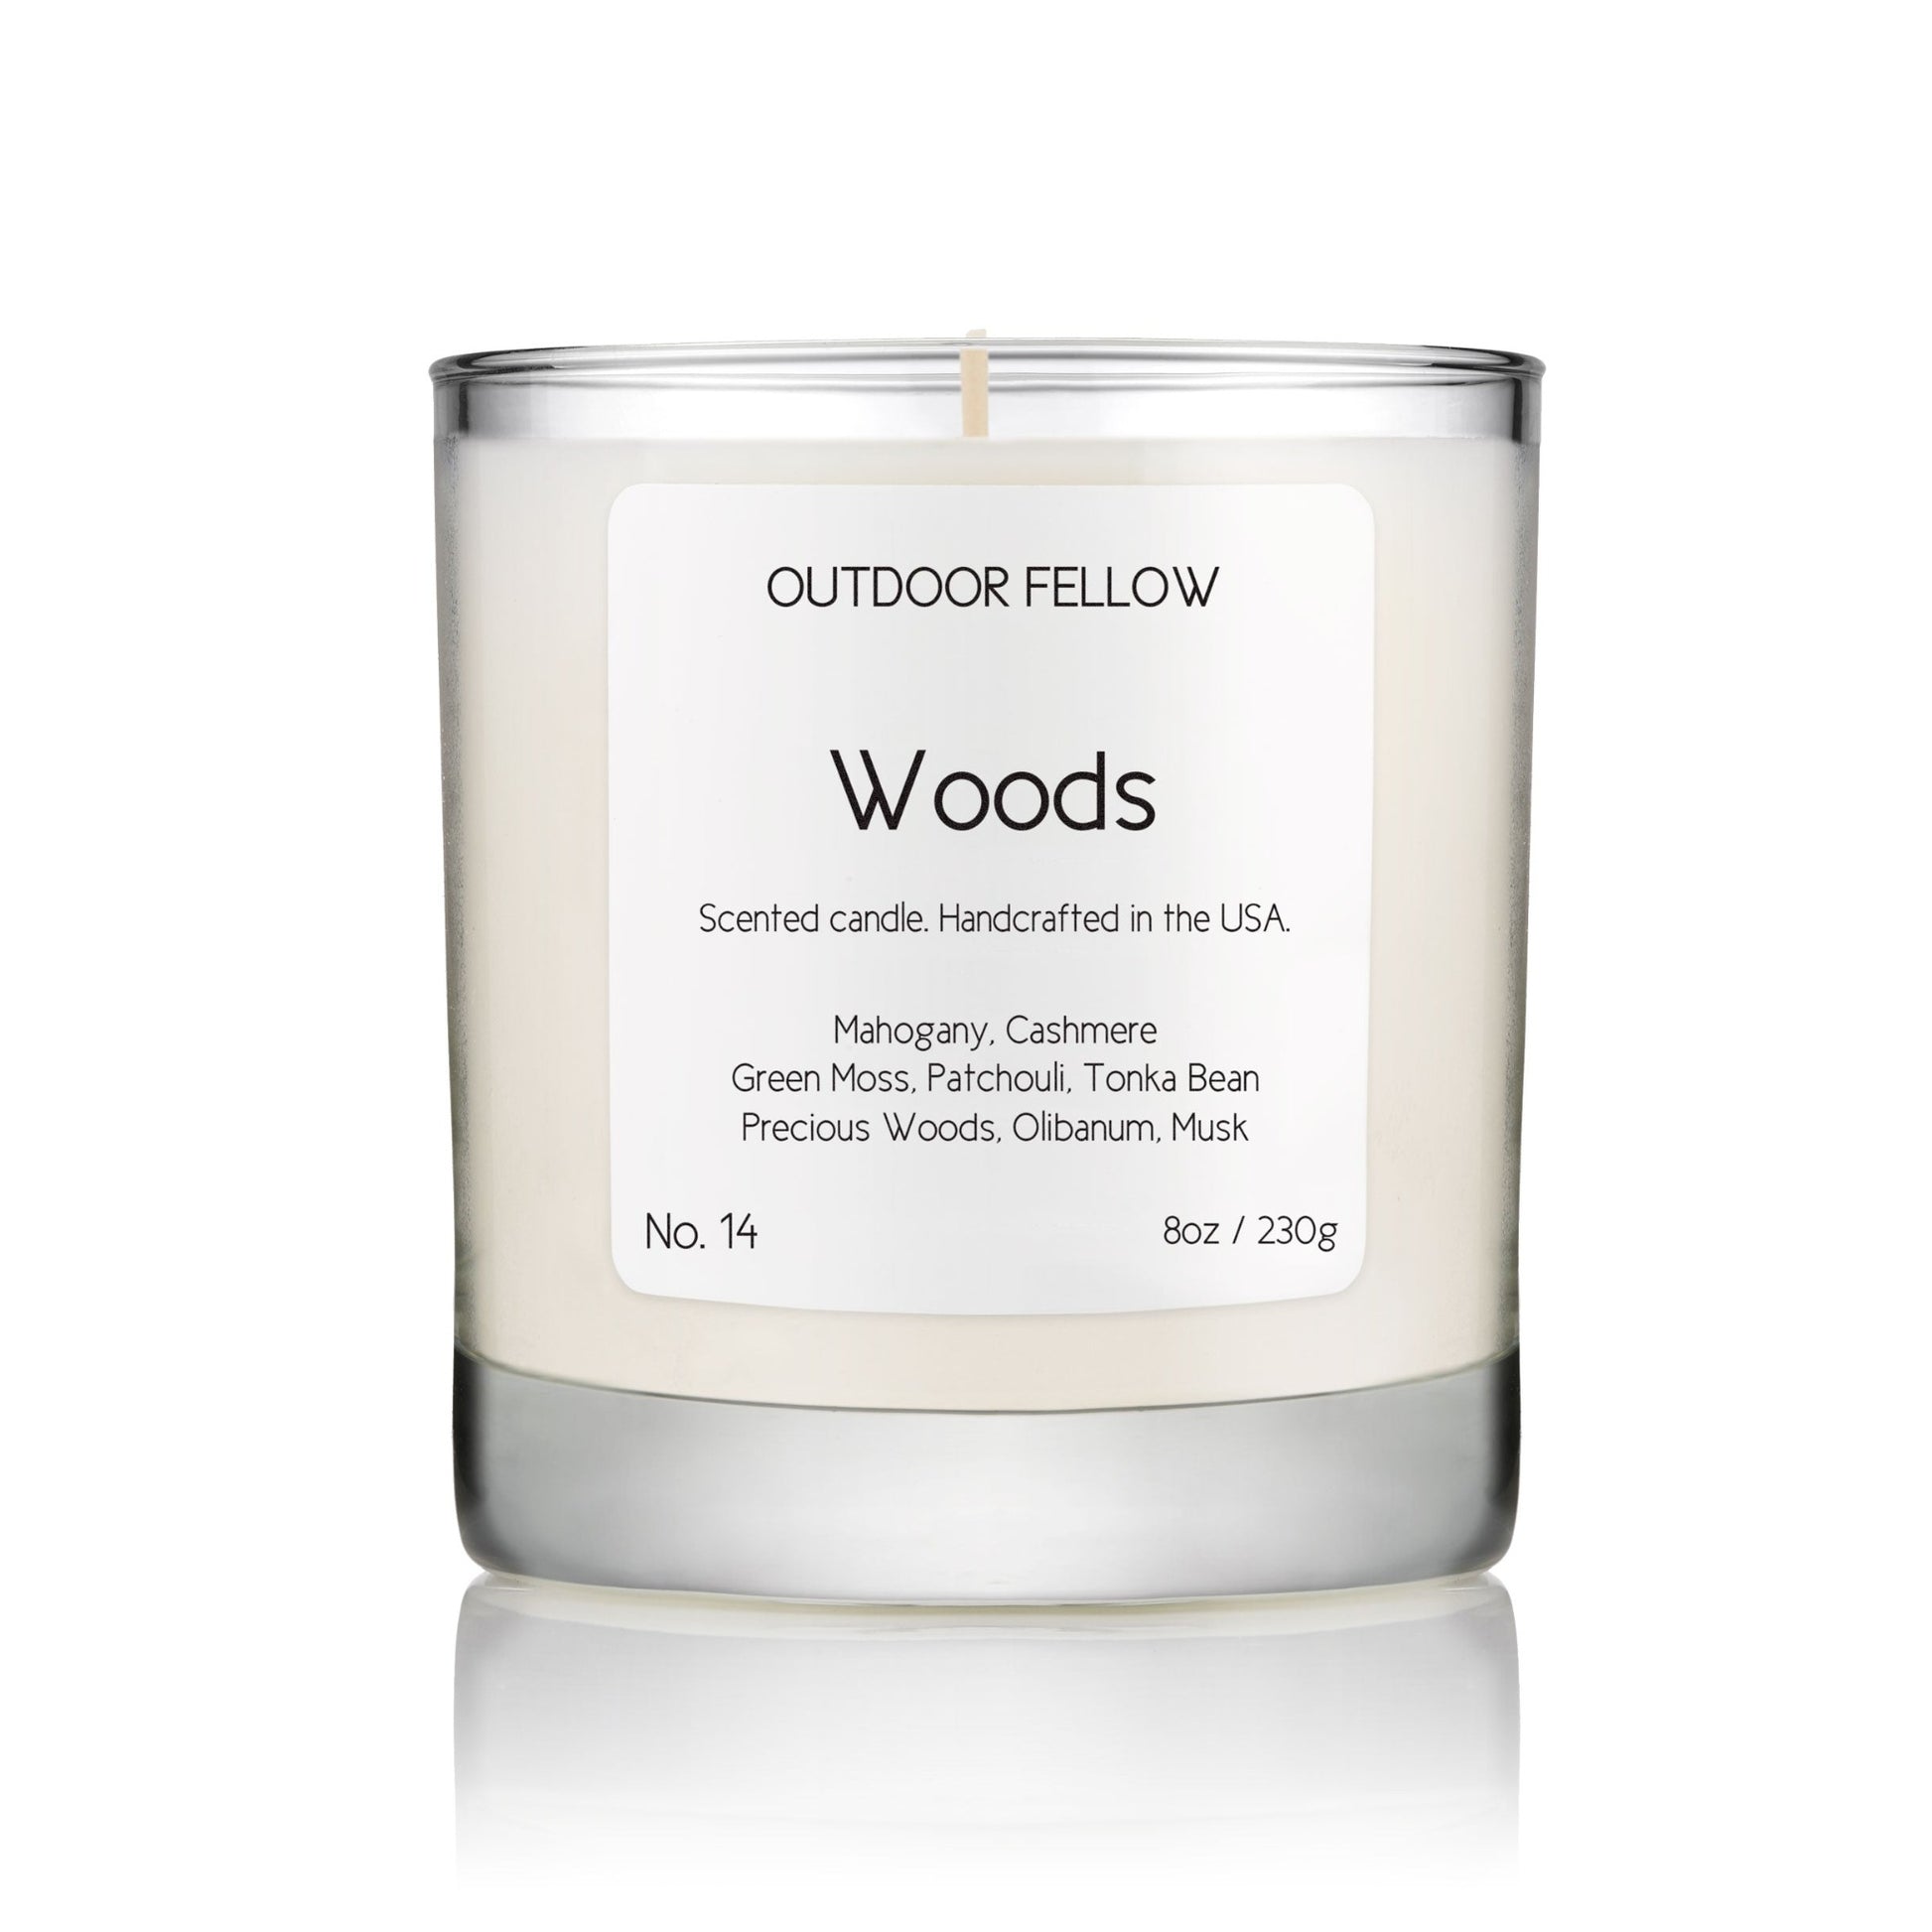 Woods scented candle on white background